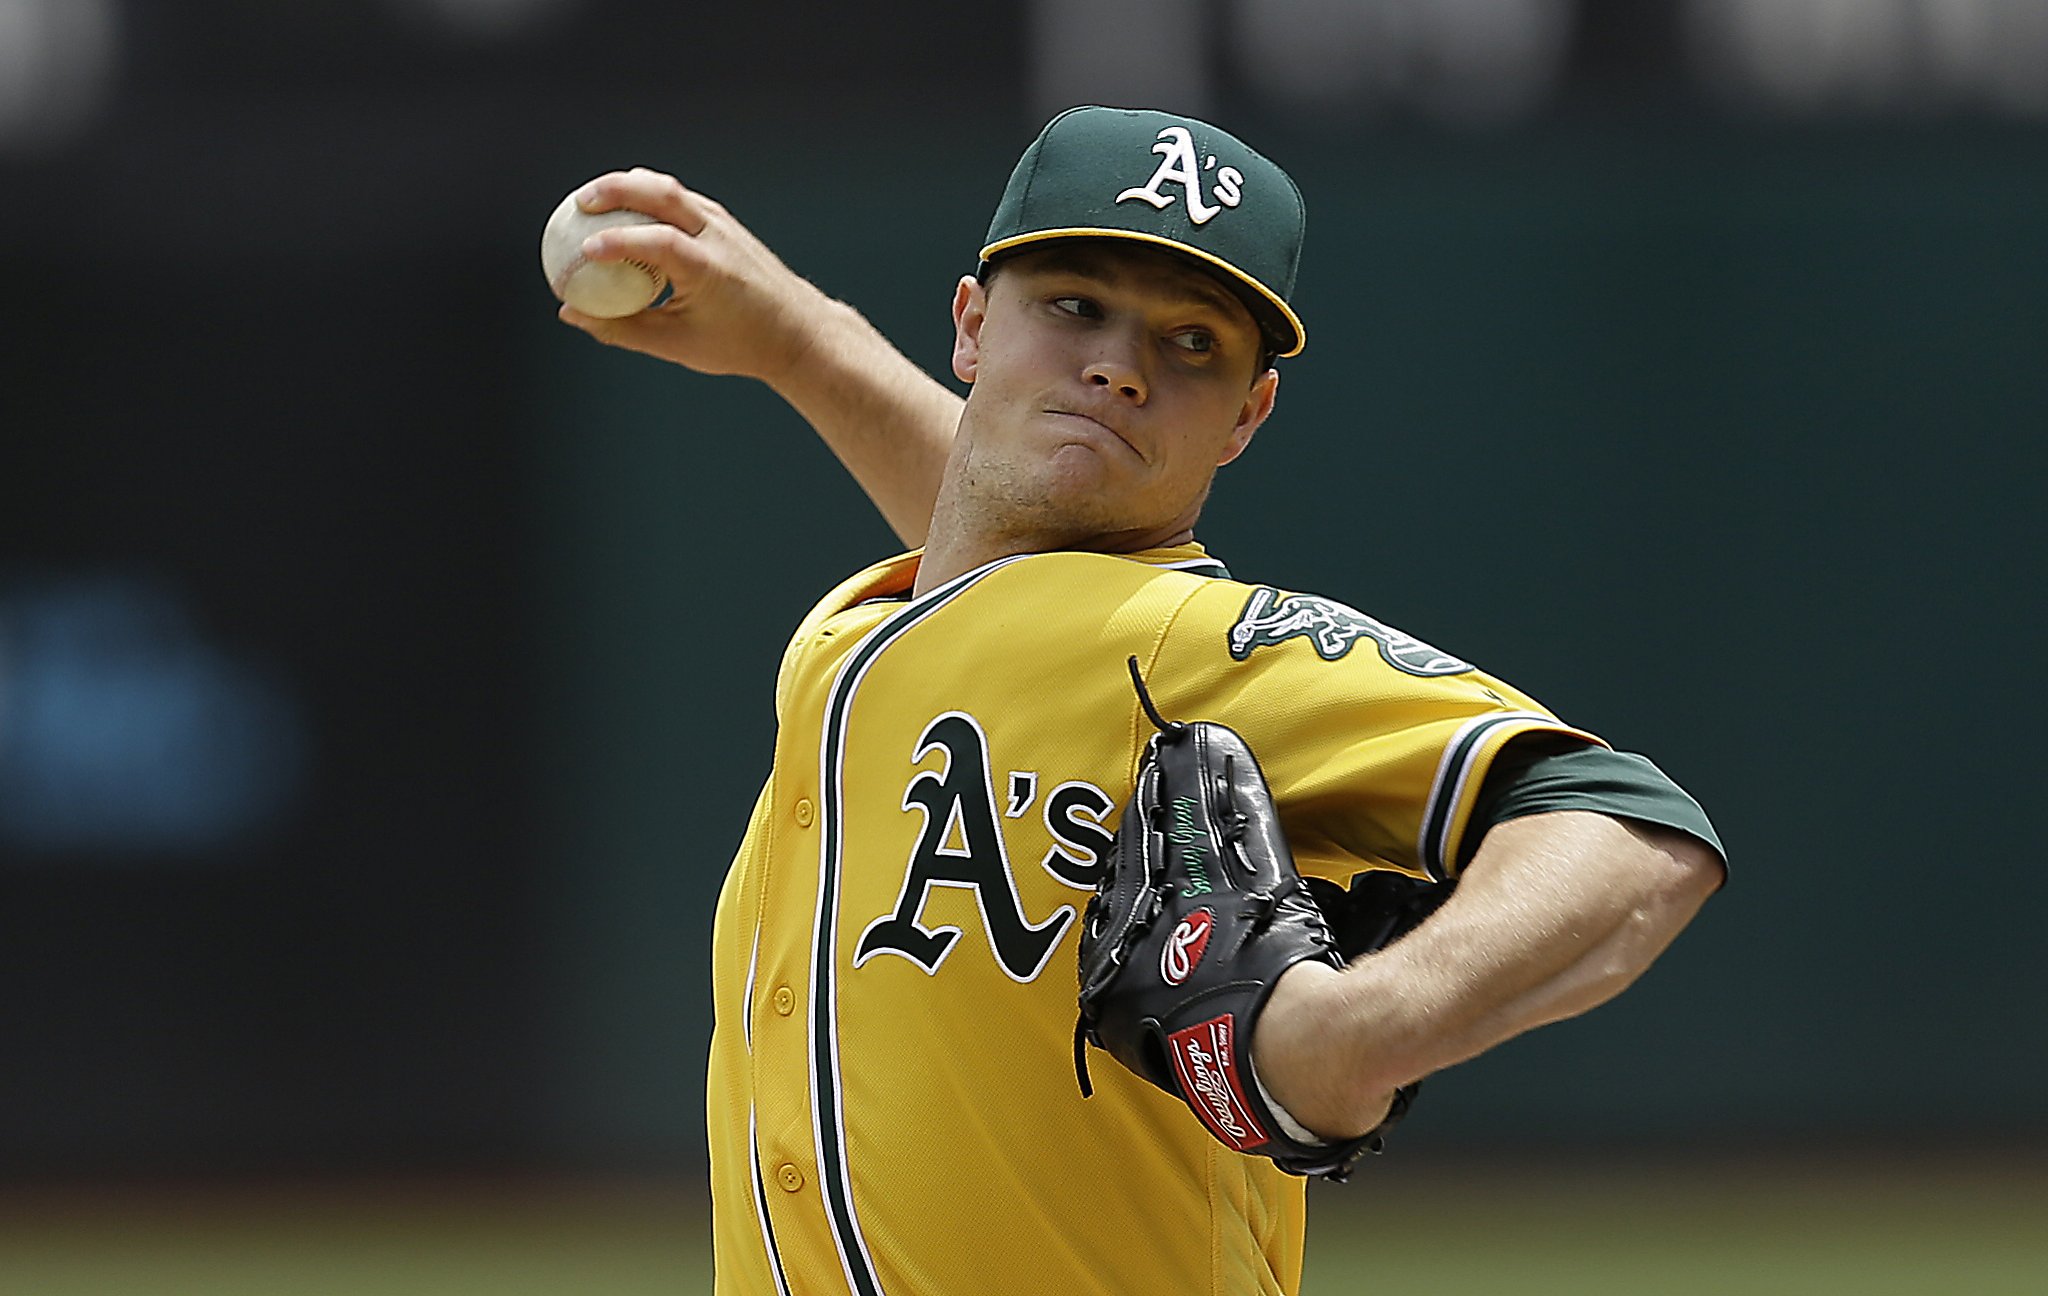 Trade check-in: Yankees acquire Sonny Gray from Oakland for three